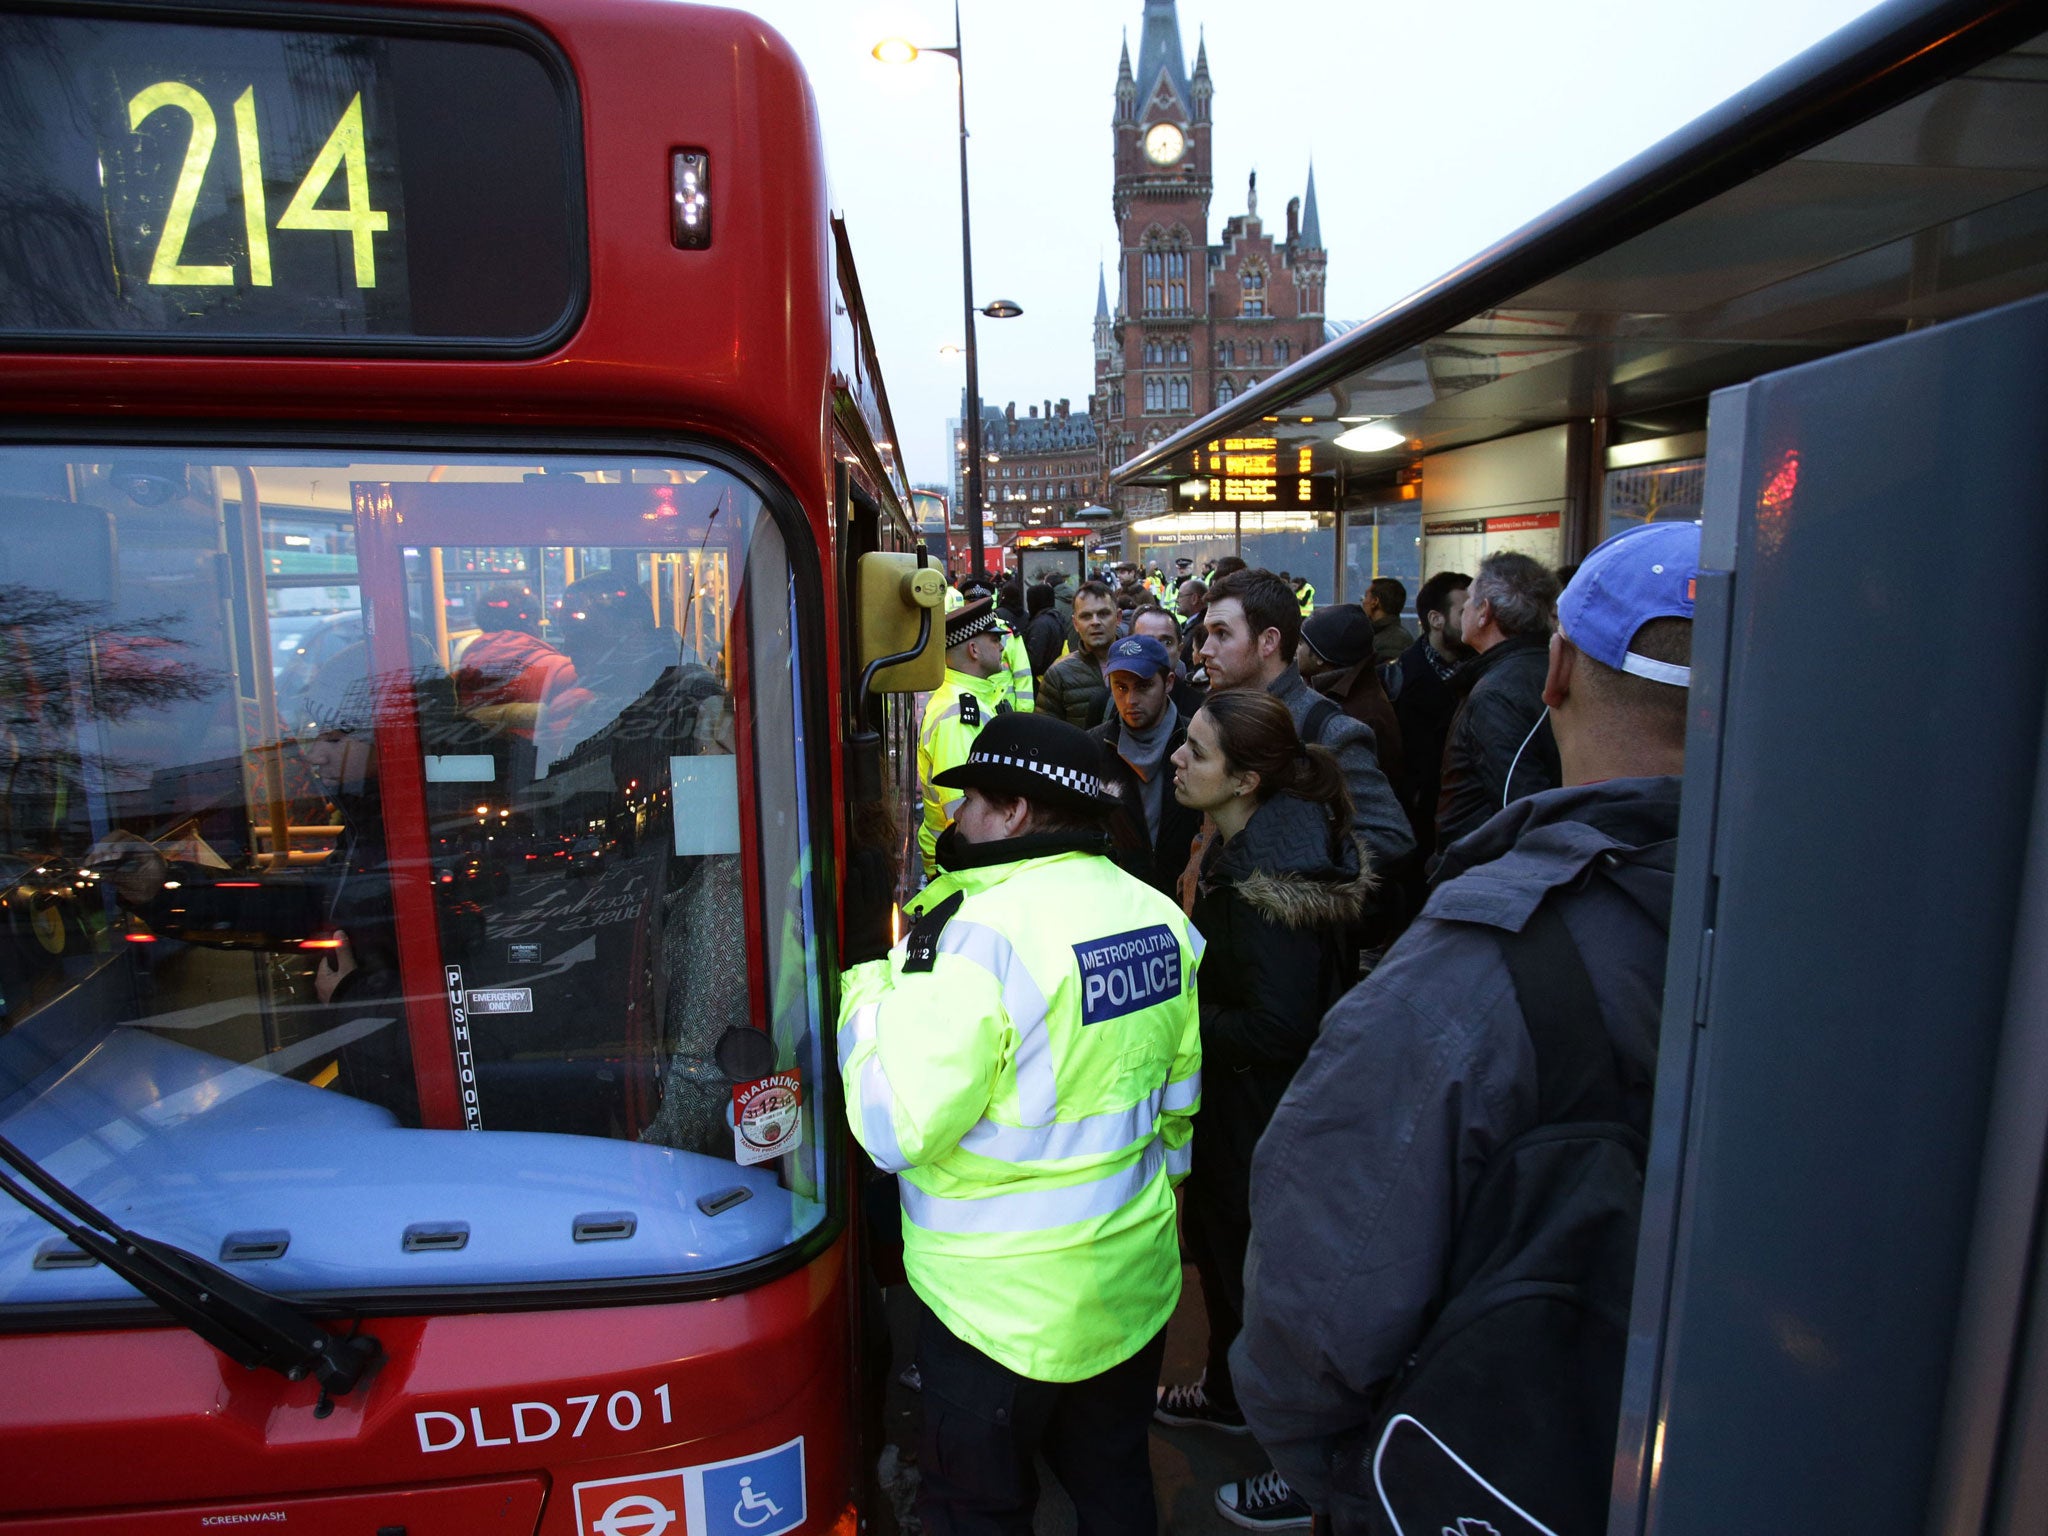 Commuters waiting at a bus stop at King's Cross station during the London Underground workers strike in 2014